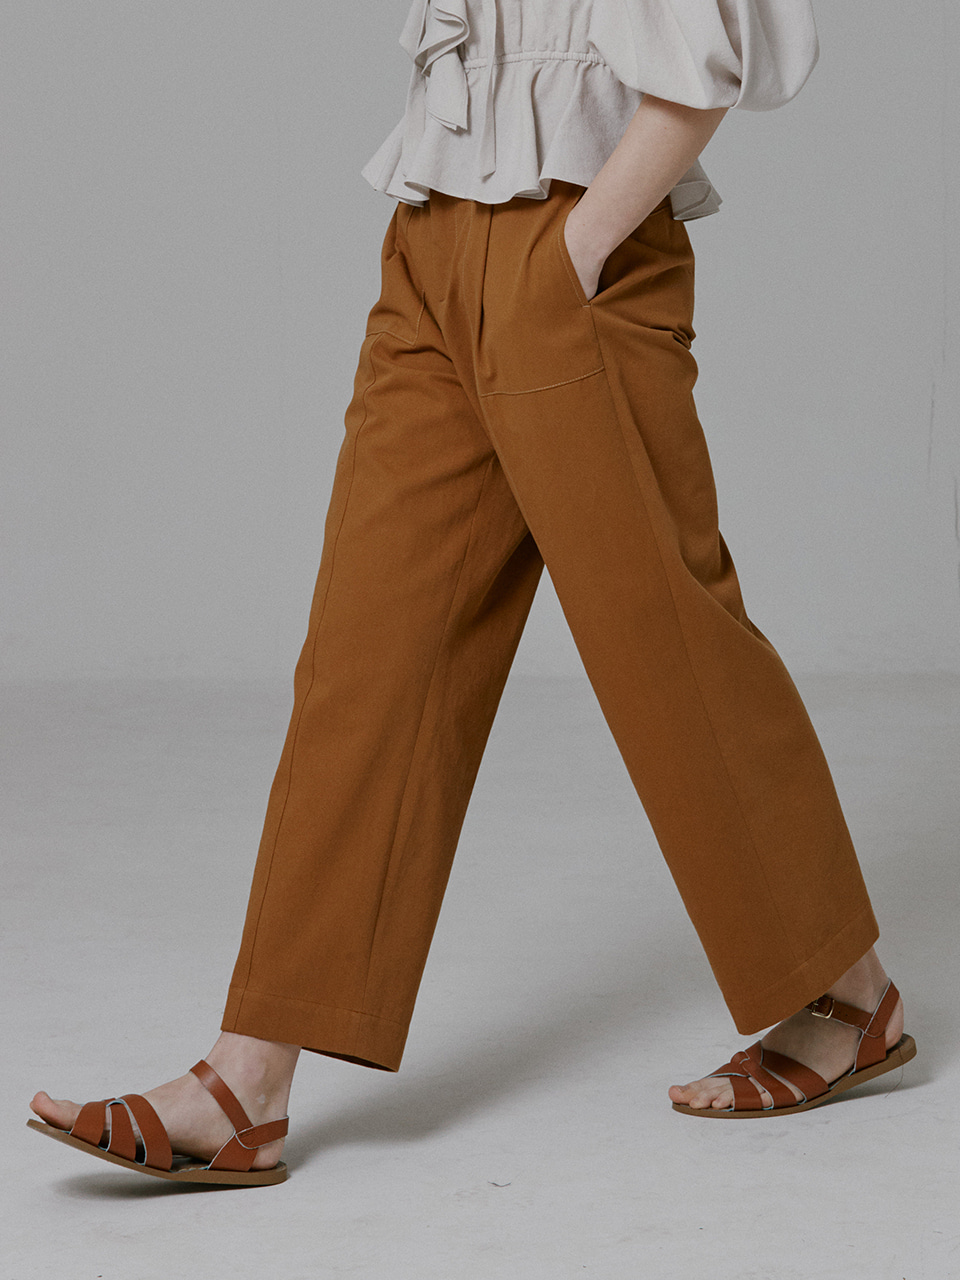 Odelie Stitches Semi wide Pants_Brown